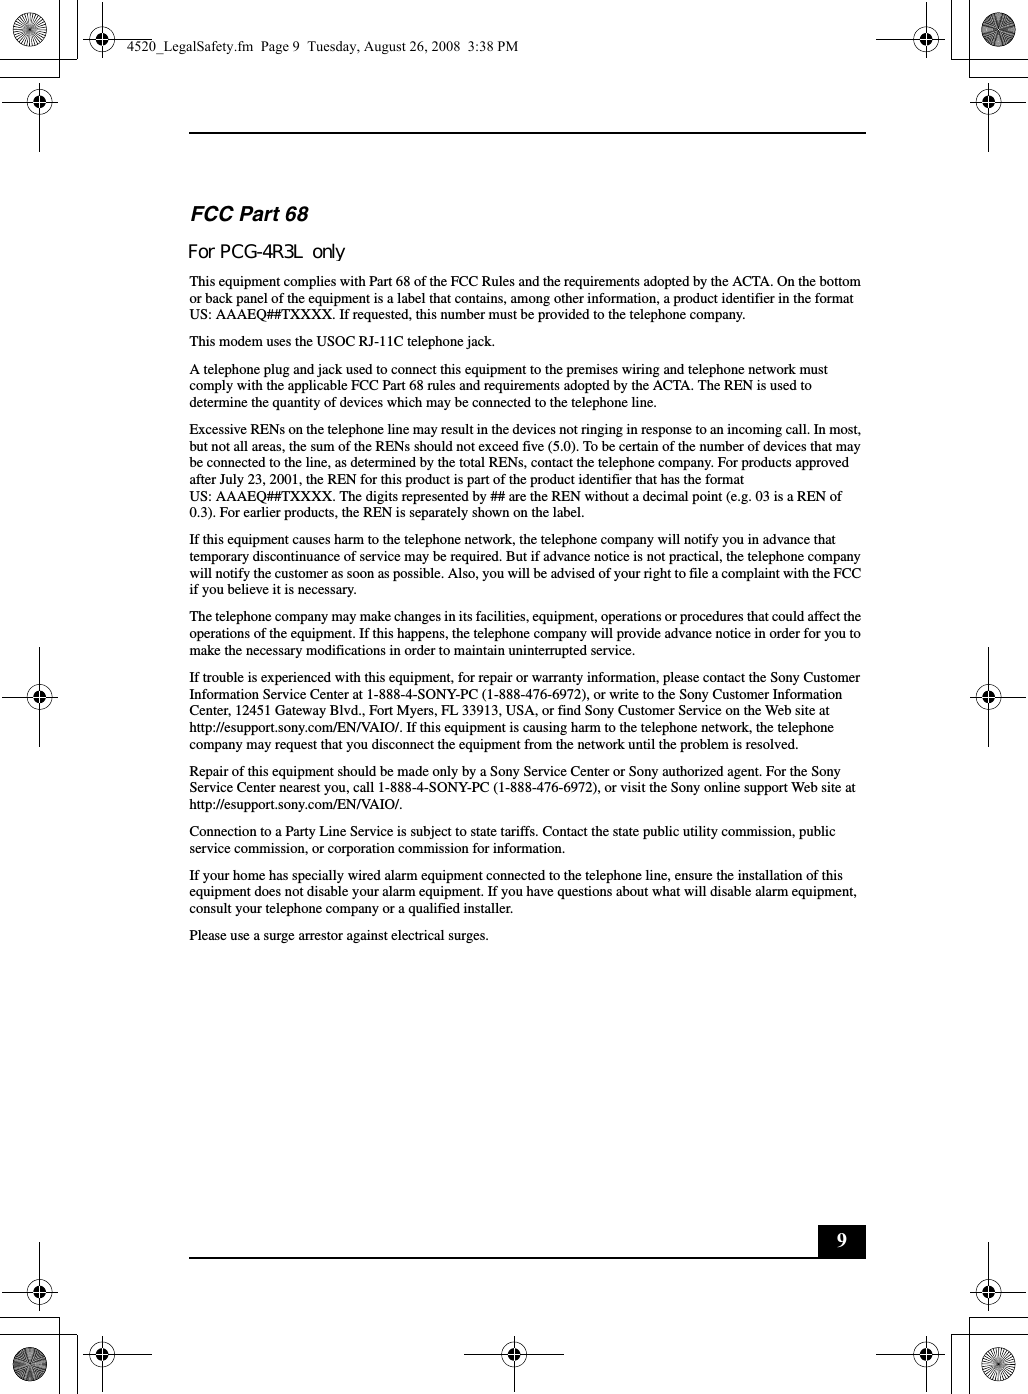 9FCC Part 68 For PCG-4Q4L onlyThis equipment complies with Part 68 of the FCC Rules and the requirements adopted by the ACTA. On the bottom or back panel of the equipment is a label that contains, among other information, a product identifier in the format US: AAAEQ##TXXXX. If requested, this number must be provided to the telephone company.This modem uses the USOC RJ-11C telephone jack.A telephone plug and jack used to connect this equipment to the premises wiring and telephone network must comply with the applicable FCC Part 68 rules and requirements adopted by the ACTA. The REN is used to determine the quantity of devices which may be connected to the telephone line.Excessive RENs on the telephone line may result in the devices not ringing in response to an incoming call. In most, but not all areas, the sum of the RENs should not exceed five (5.0). To be certain of the number of devices that may be connected to the line, as determined by the total RENs, contact the telephone company. For products approved after July 23, 2001, the REN for this product is part of the product identifier that has the format US: AAAEQ##TXXXX. The digits represented by ## are the REN without a decimal point (e.g. 03 is a REN of 0.3). For earlier products, the REN is separately shown on the label.If this equipment causes harm to the telephone network, the telephone company will notify you in advance that temporary discontinuance of service may be required. But if advance notice is not practical, the telephone company will notify the customer as soon as possible. Also, you will be advised of your right to file a complaint with the FCC if you believe it is necessary.The telephone company may make changes in its facilities, equipment, operations or procedures that could affect the operations of the equipment. If this happens, the telephone company will provide advance notice in order for you to make the necessary modifications in order to maintain uninterrupted service.If trouble is experienced with this equipment, for repair or warranty information, please contact the Sony Customer Information Service Center at 1-888-4-SONY-PC (1-888-476-6972), or write to the Sony Customer Information Center, 12451 Gateway Blvd., Fort Myers, FL 33913, USA, or find Sony Customer Service on the Web site at http://esupport.sony.com/EN/VAIO/. If this equipment is causing harm to the telephone network, the telephone company may request that you disconnect the equipment from the network until the problem is resolved.Repair of this equipment should be made only by a Sony Service Center or Sony authorized agent. For the Sony Service Center nearest you, call 1-888-4-SONY-PC (1-888-476-6972), or visit the Sony online support Web site at http://esupport.sony.com/EN/VAIO/.Connection to a Party Line Service is subject to state tariffs. Contact the state public utility commission, public service commission, or corporation commission for information.If your home has specially wired alarm equipment connected to the telephone line, ensure the installation of this equipment does not disable your alarm equipment. If you have questions about what will disable alarm equipment, consult your telephone company or a qualified installer.Please use a surge arrestor against electrical surges.4520_LegalSafety.fm  Page 9  Tuesday, August 26, 2008  3:38 PMFor PCG-4R3L only